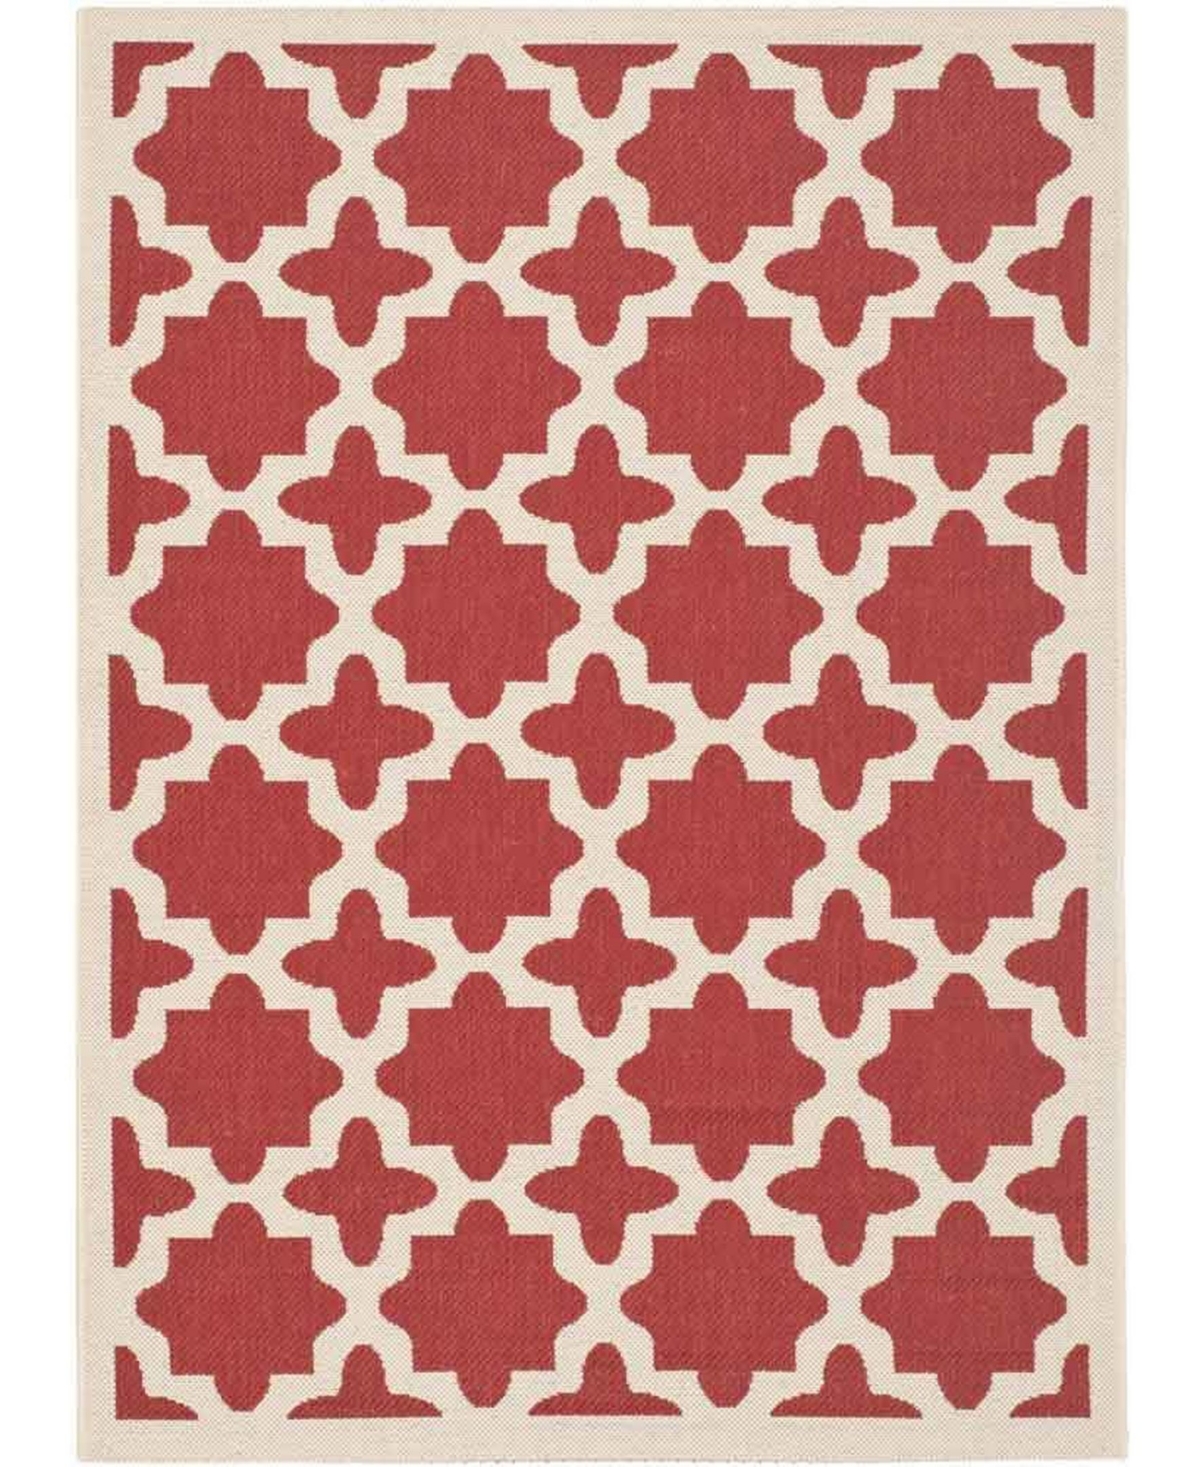 Safavieh Courtyard Cy6913 Red And Bone 5'3" X 7'7" Sisal Weave Outdoor Area Rug In Red,bone